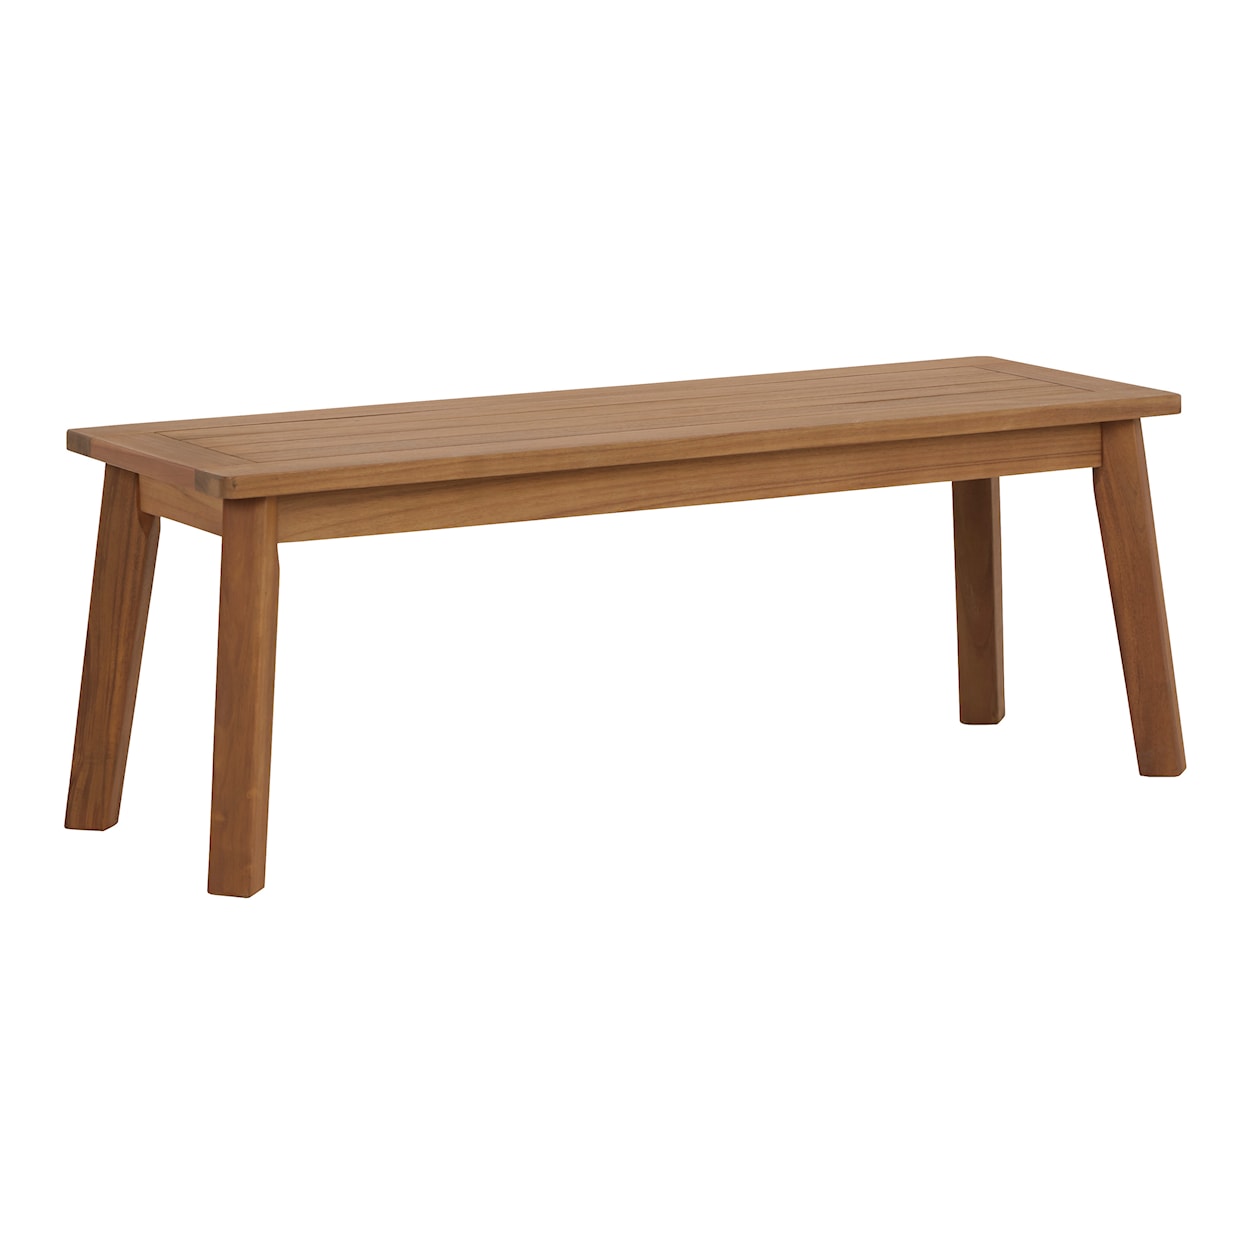 Signature Design by Ashley Janiyah Outdoor Dining Table with 2 Benches